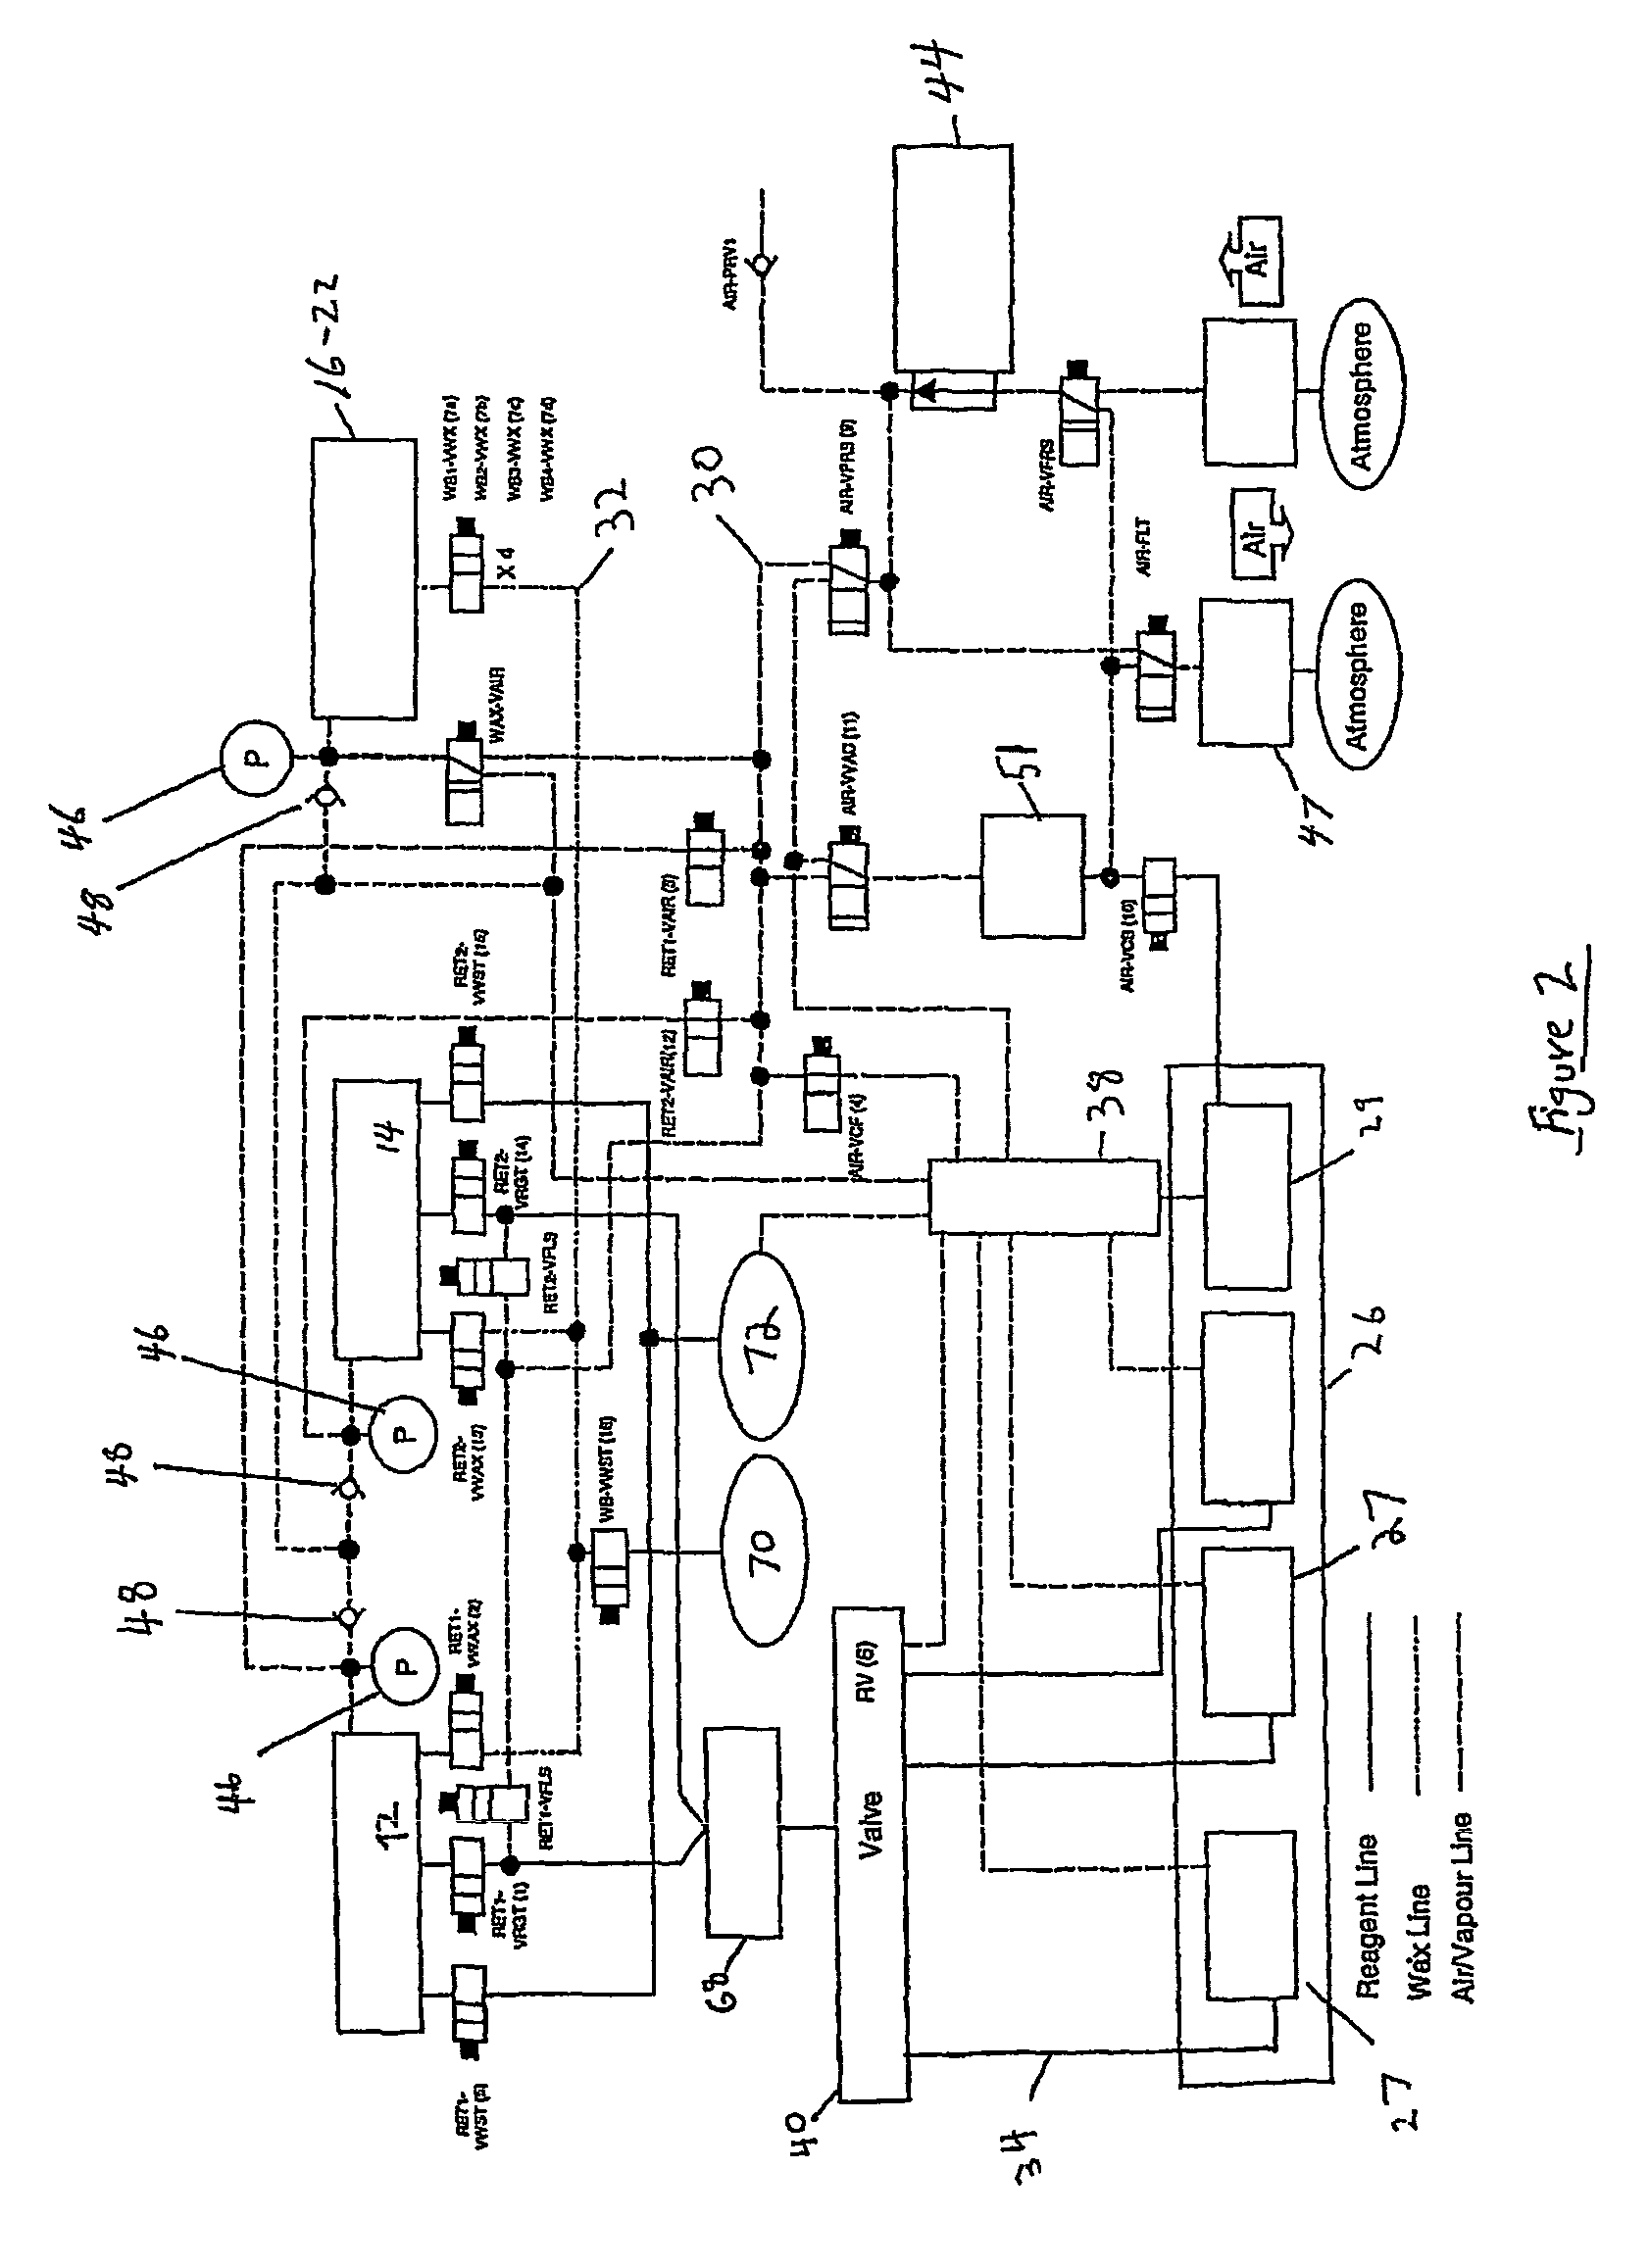 System and method for histological tissue specimen processing